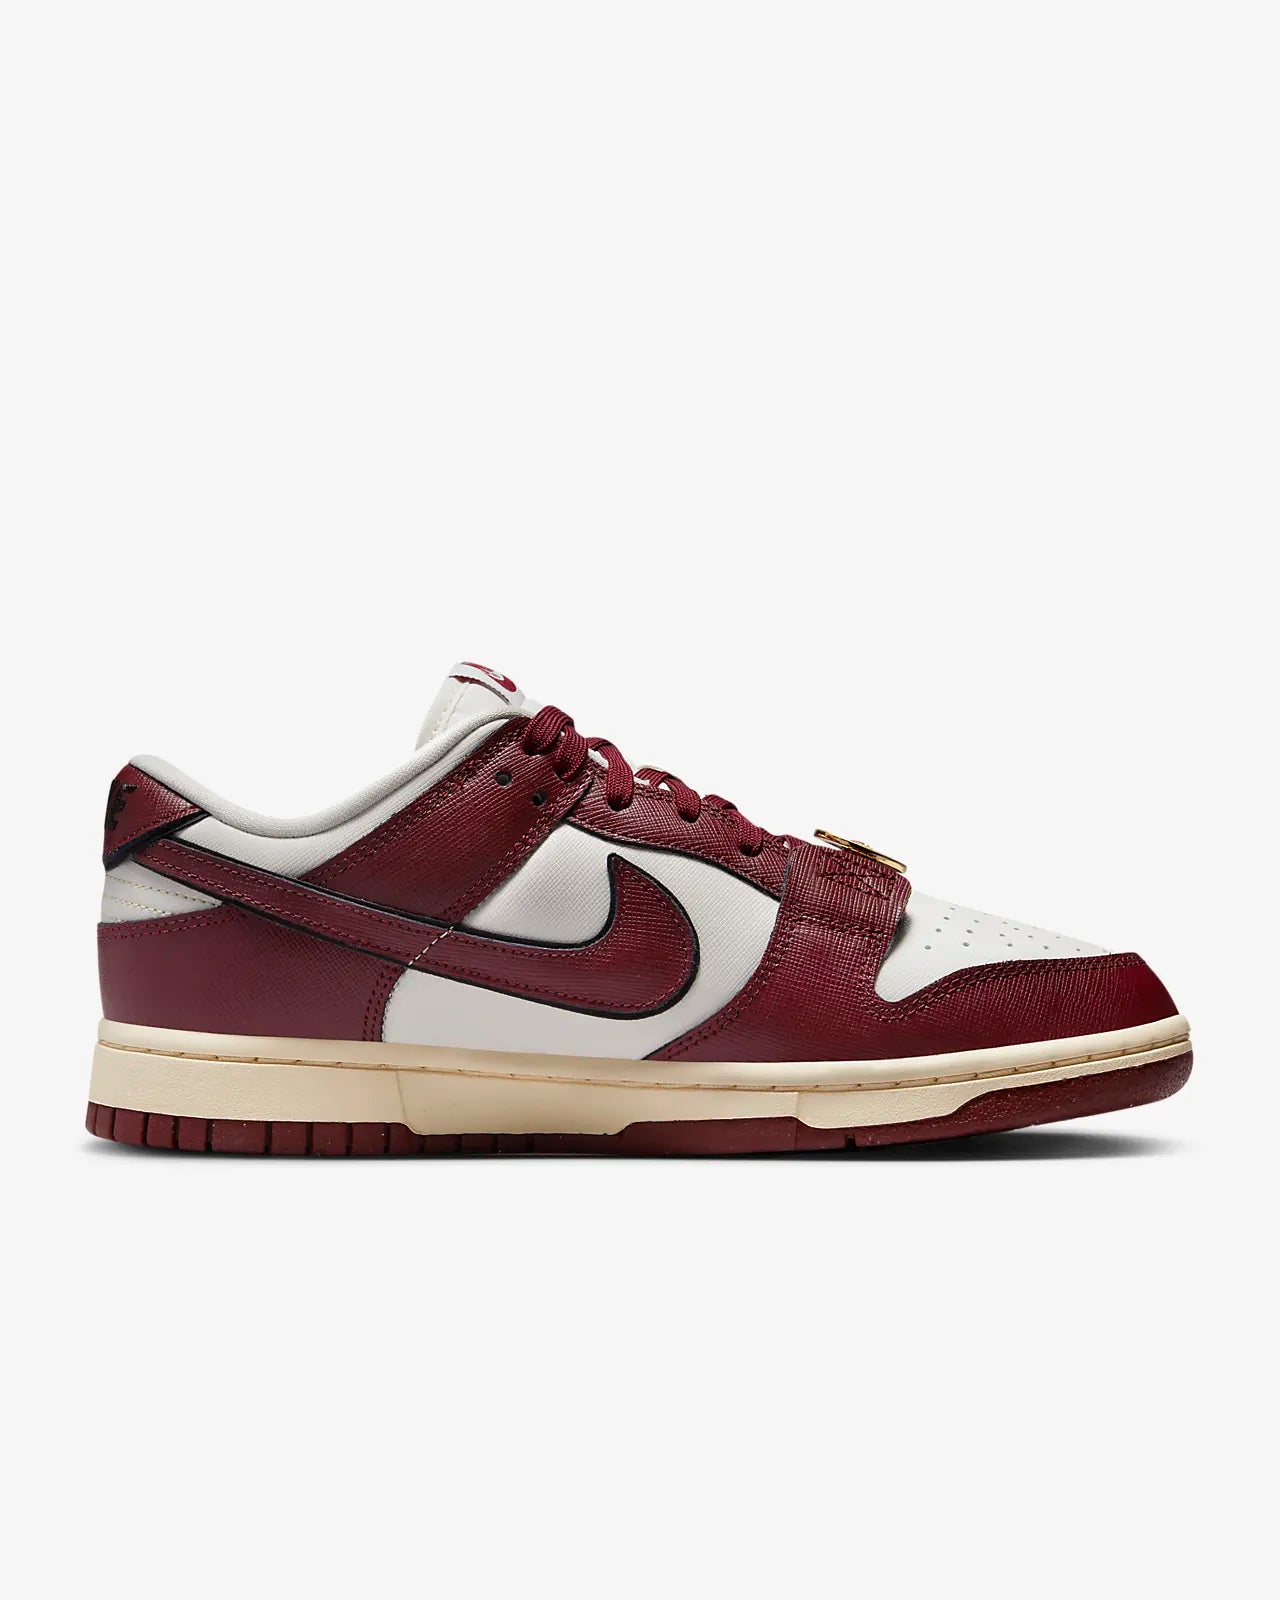 Nike - Dunk Low SE - Team Red